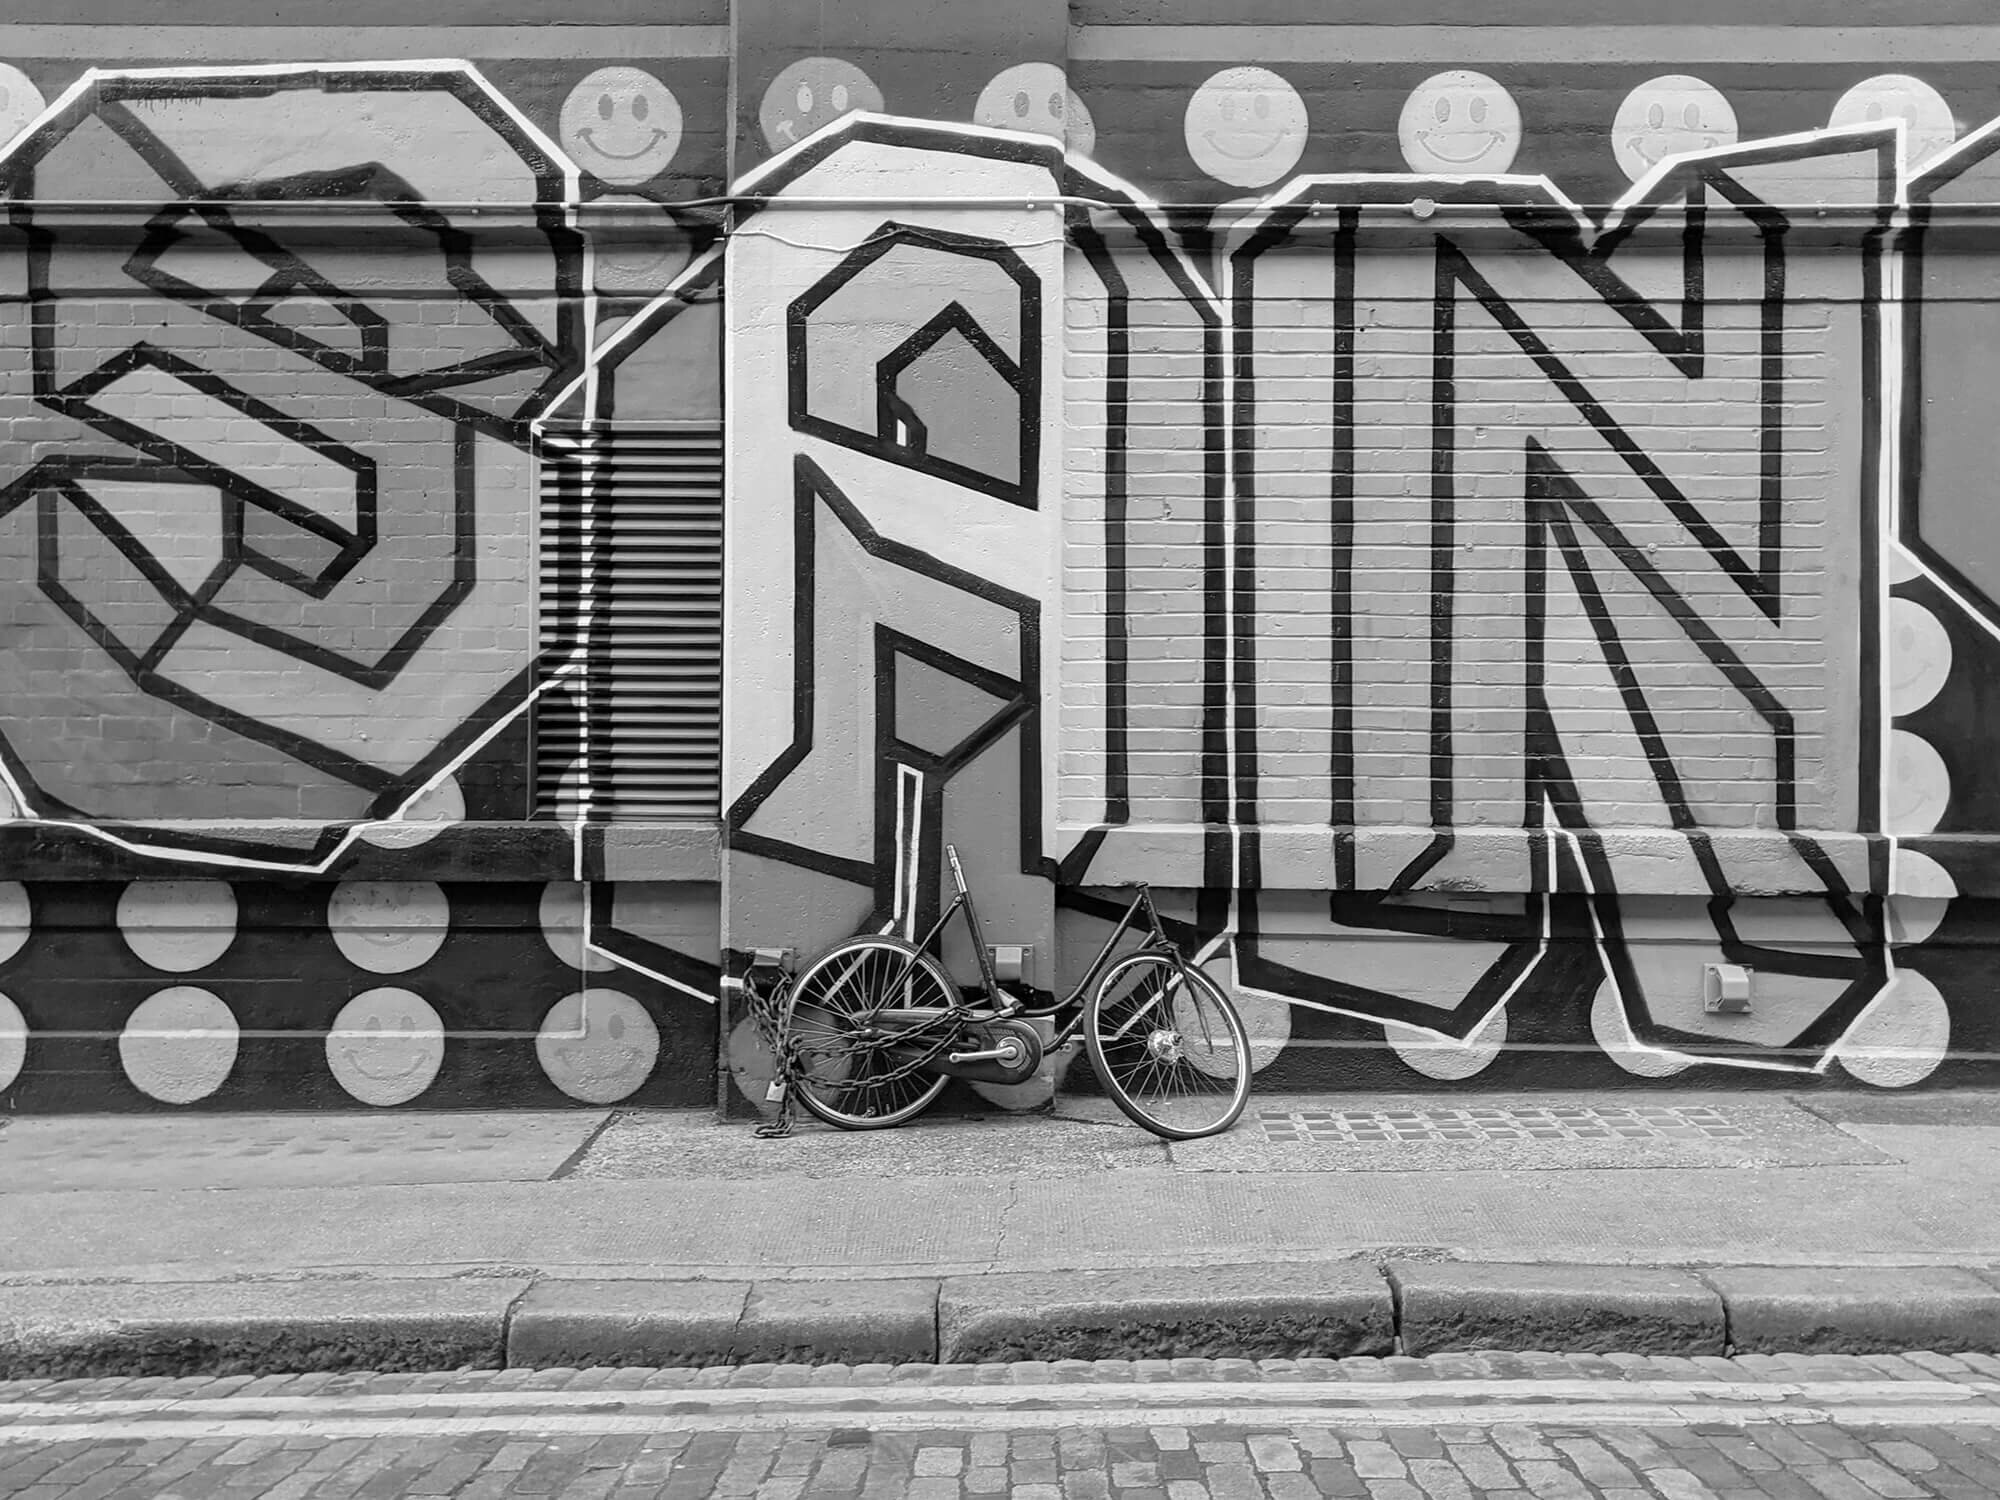 Abandoned bike in front of graffiti wall.